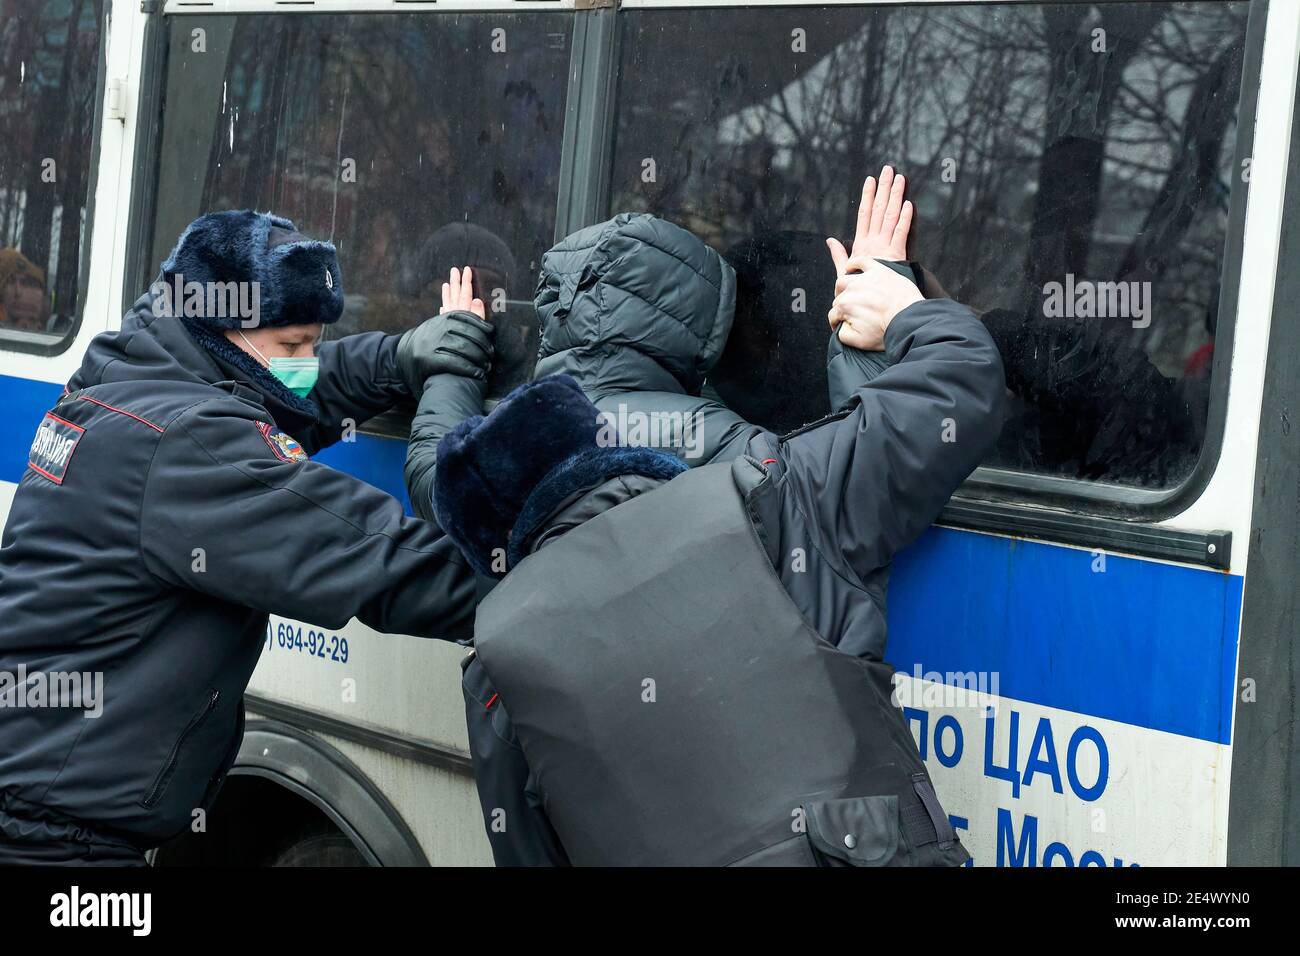 Moscow, Russia. 23rd Jan, 2021. Police search a detained protester near the paddy wagon during the protests.Rallies were held in the largest cities of Russia in support of the opposition leader Alexei Navalny, who was sent into custody after returning to Russia from Germany on suspicion of evading the control of the FSIN (Federal Penitentiary Service). The actions were accompanied by arrests on an unprecedented scale. Credit: SOPA Images Limited/Alamy Live News Stock Photo